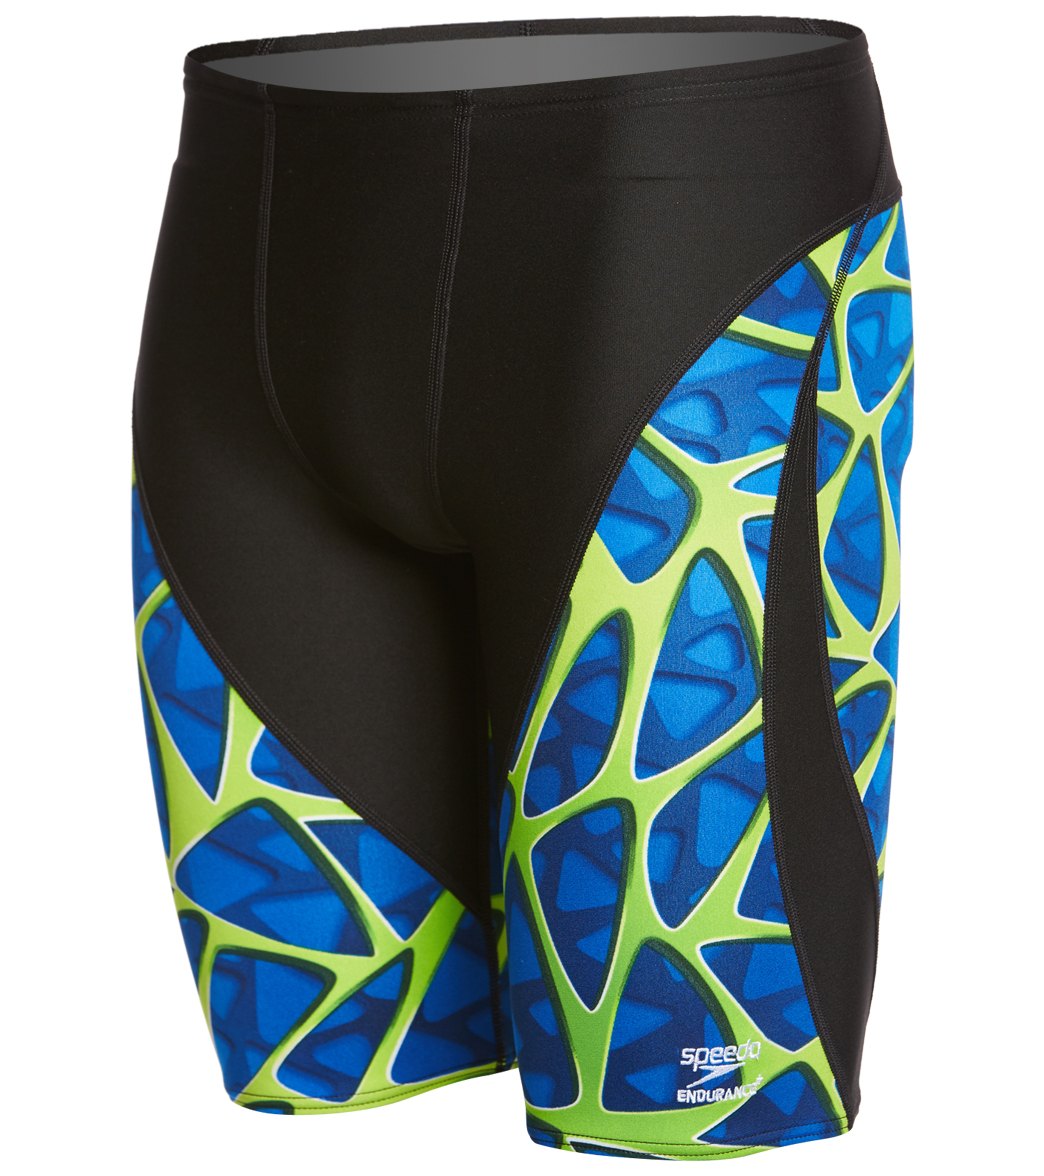 Speedo Endurance+ Men's Caged Out Jammer Swimsuit at SwimOutlet.com ...